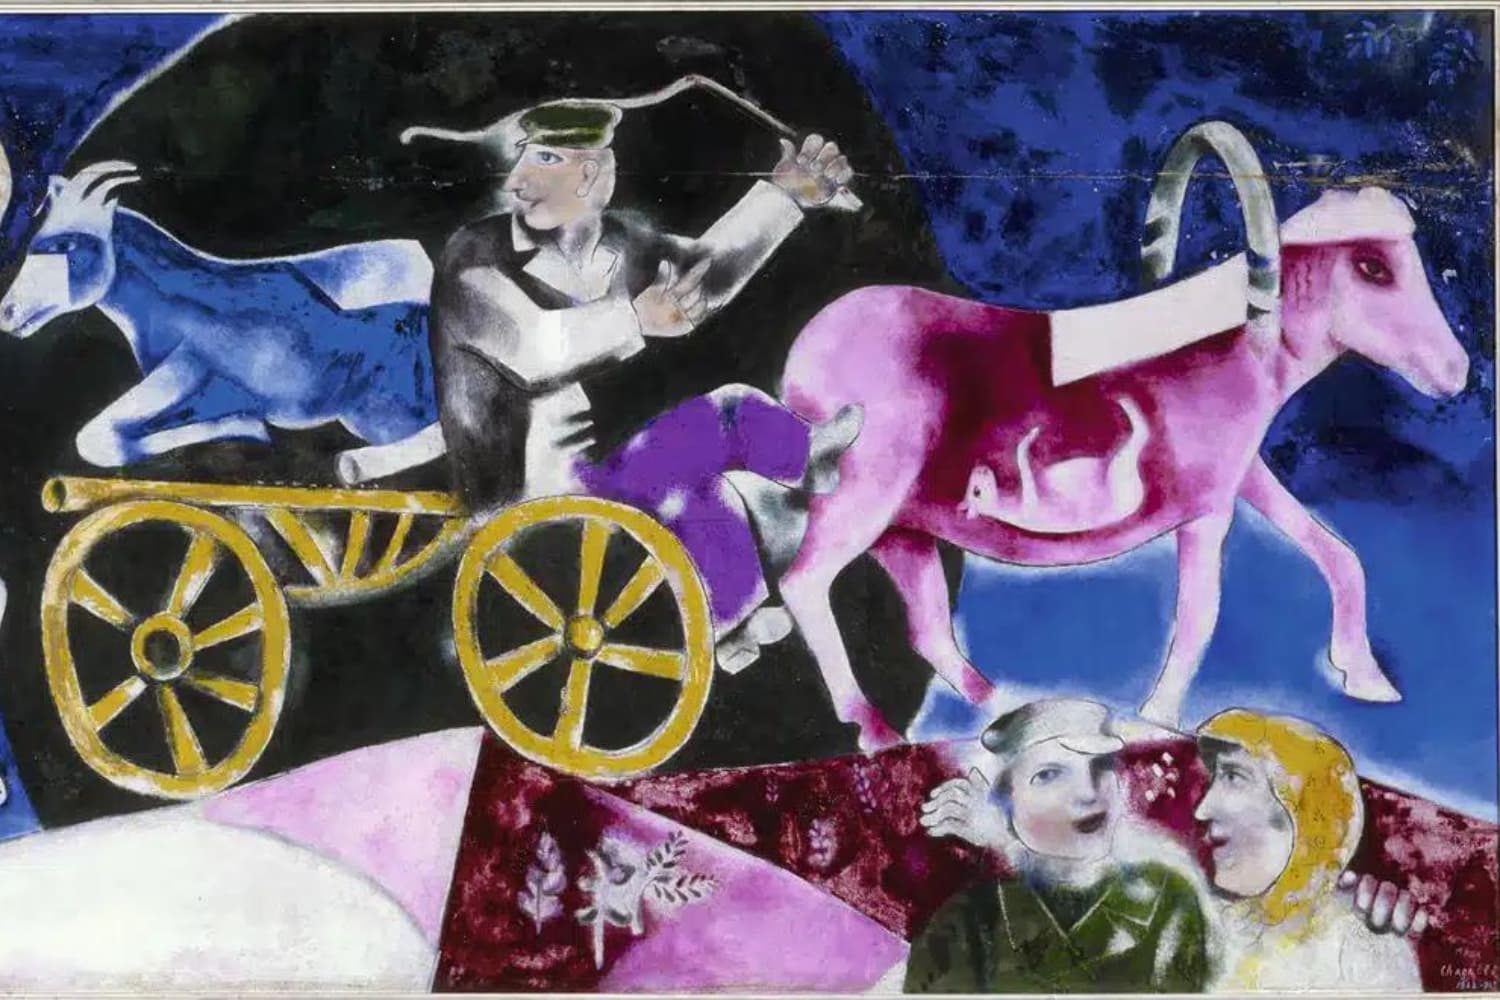 Exhibition “Chagall. A cry of freedom”